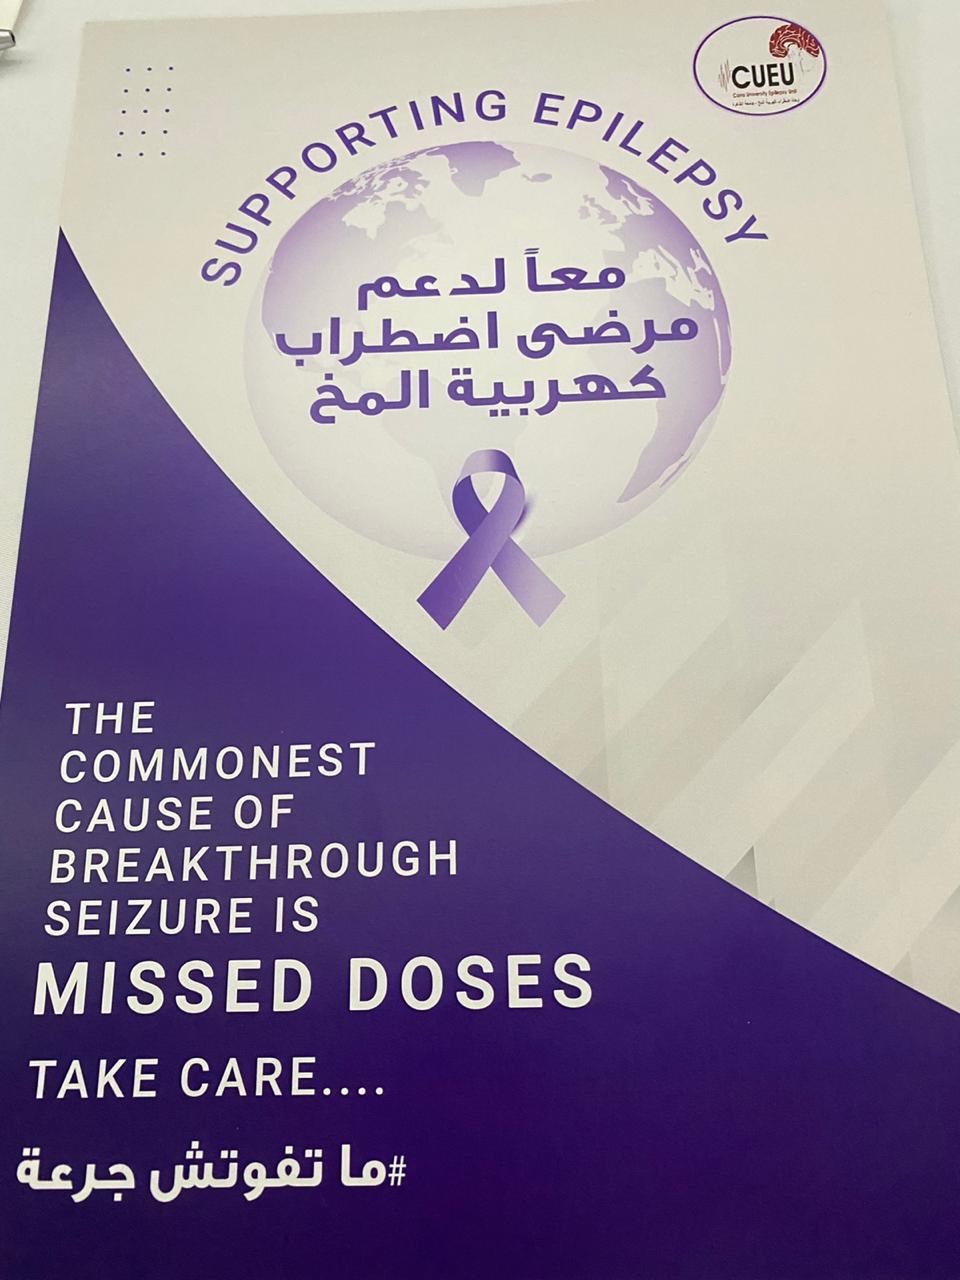 Supporting Epilepsy